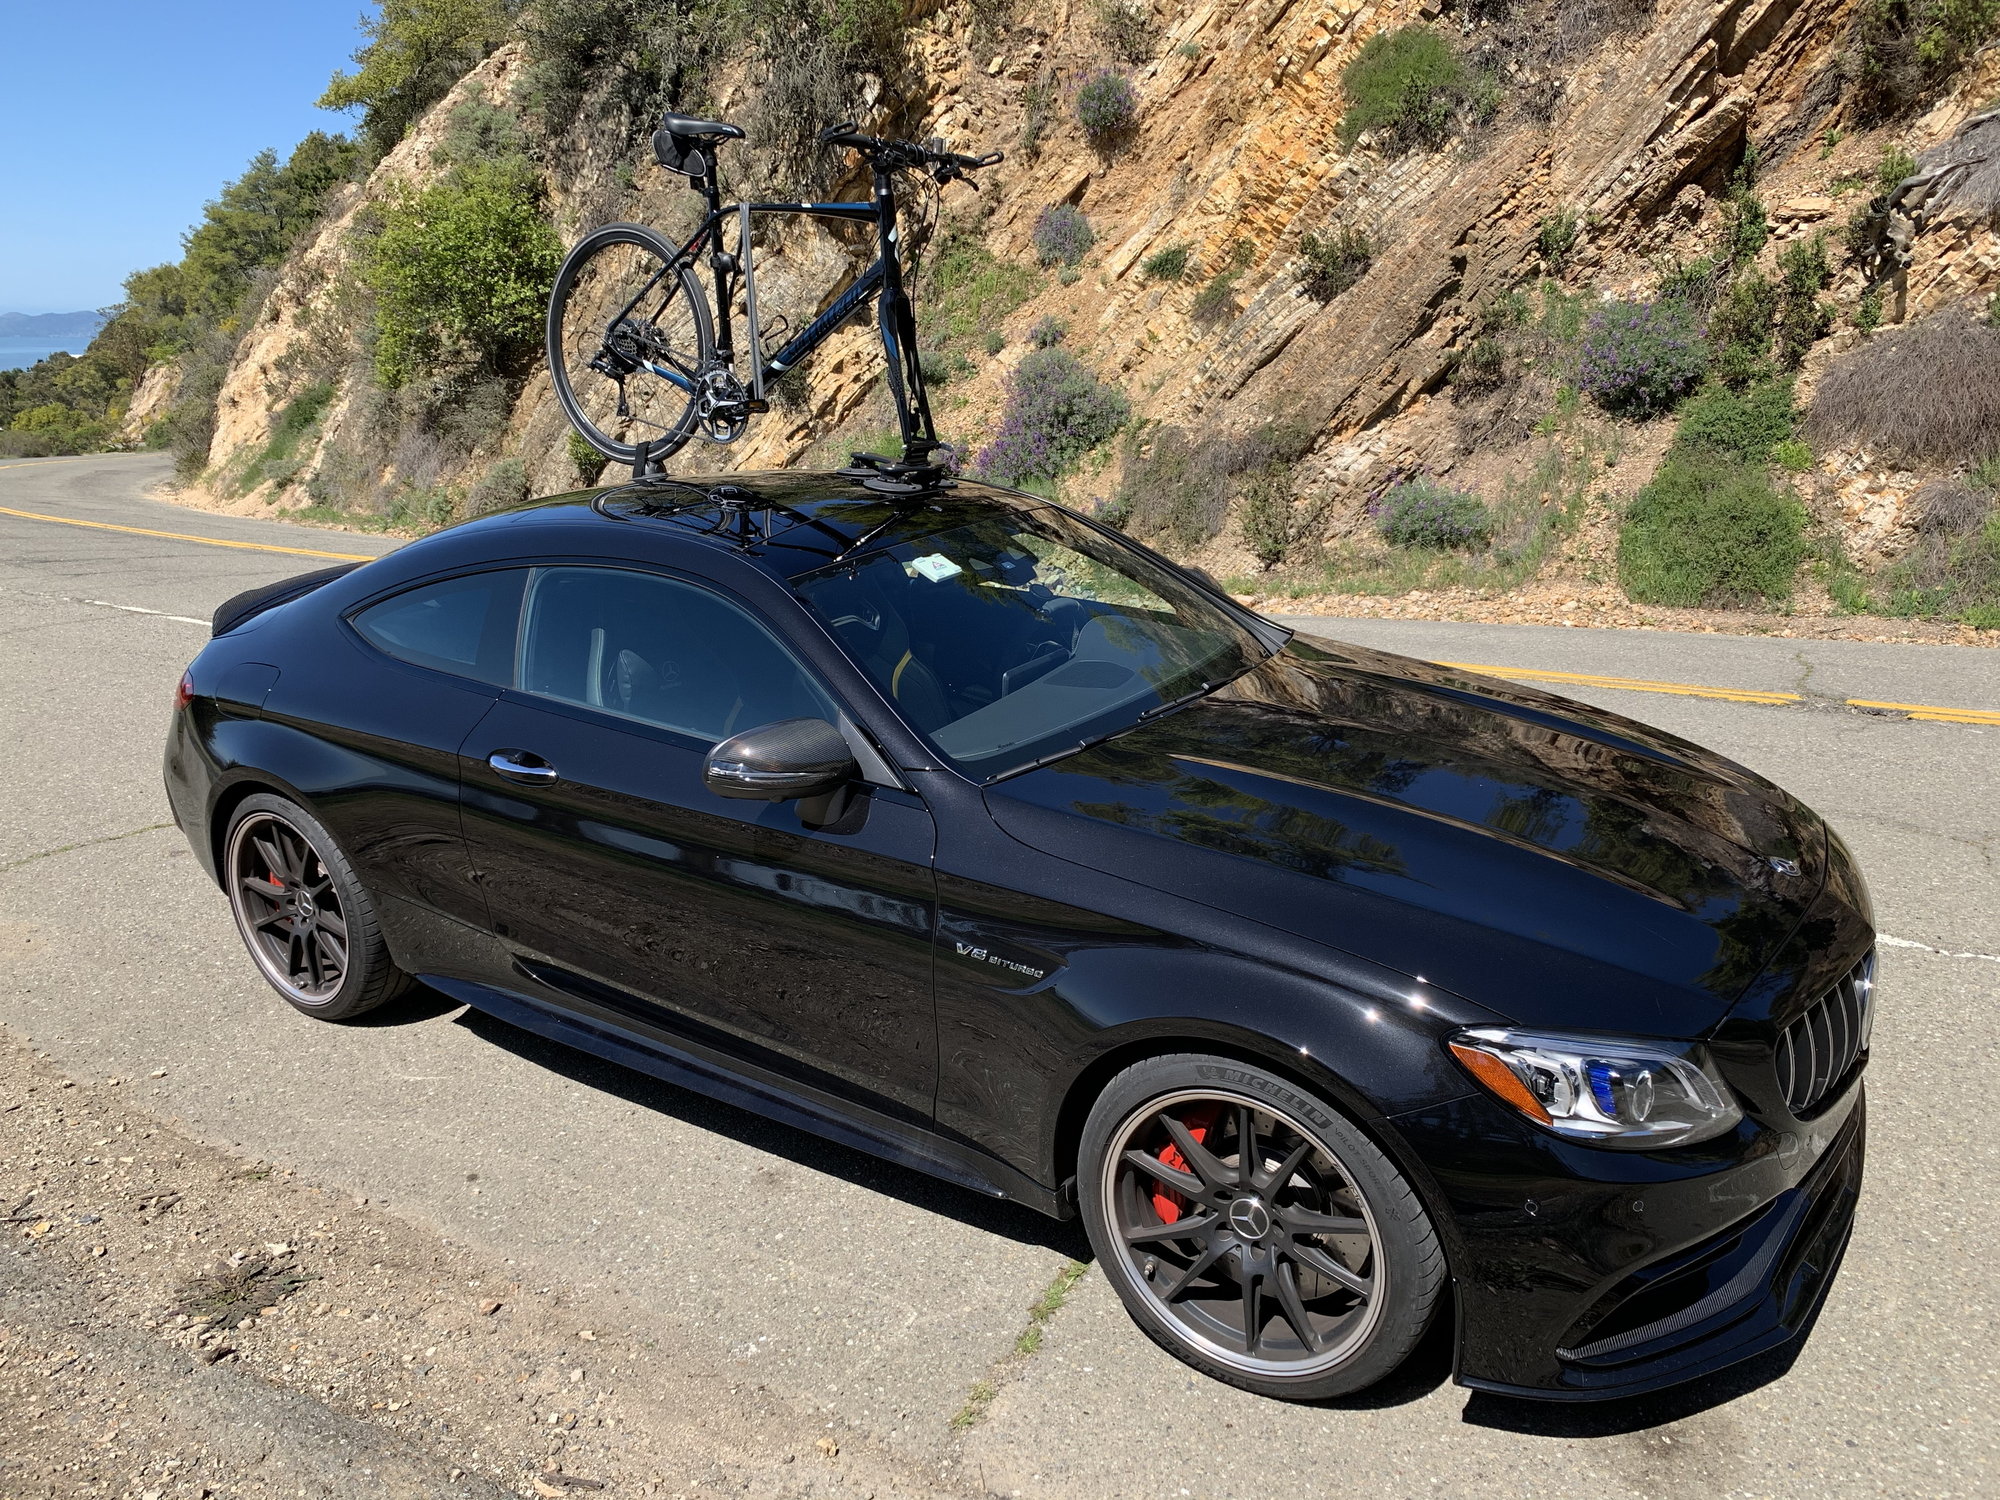 Removable bike rack for B9 A5/S5 coupe AudiWorld Forums